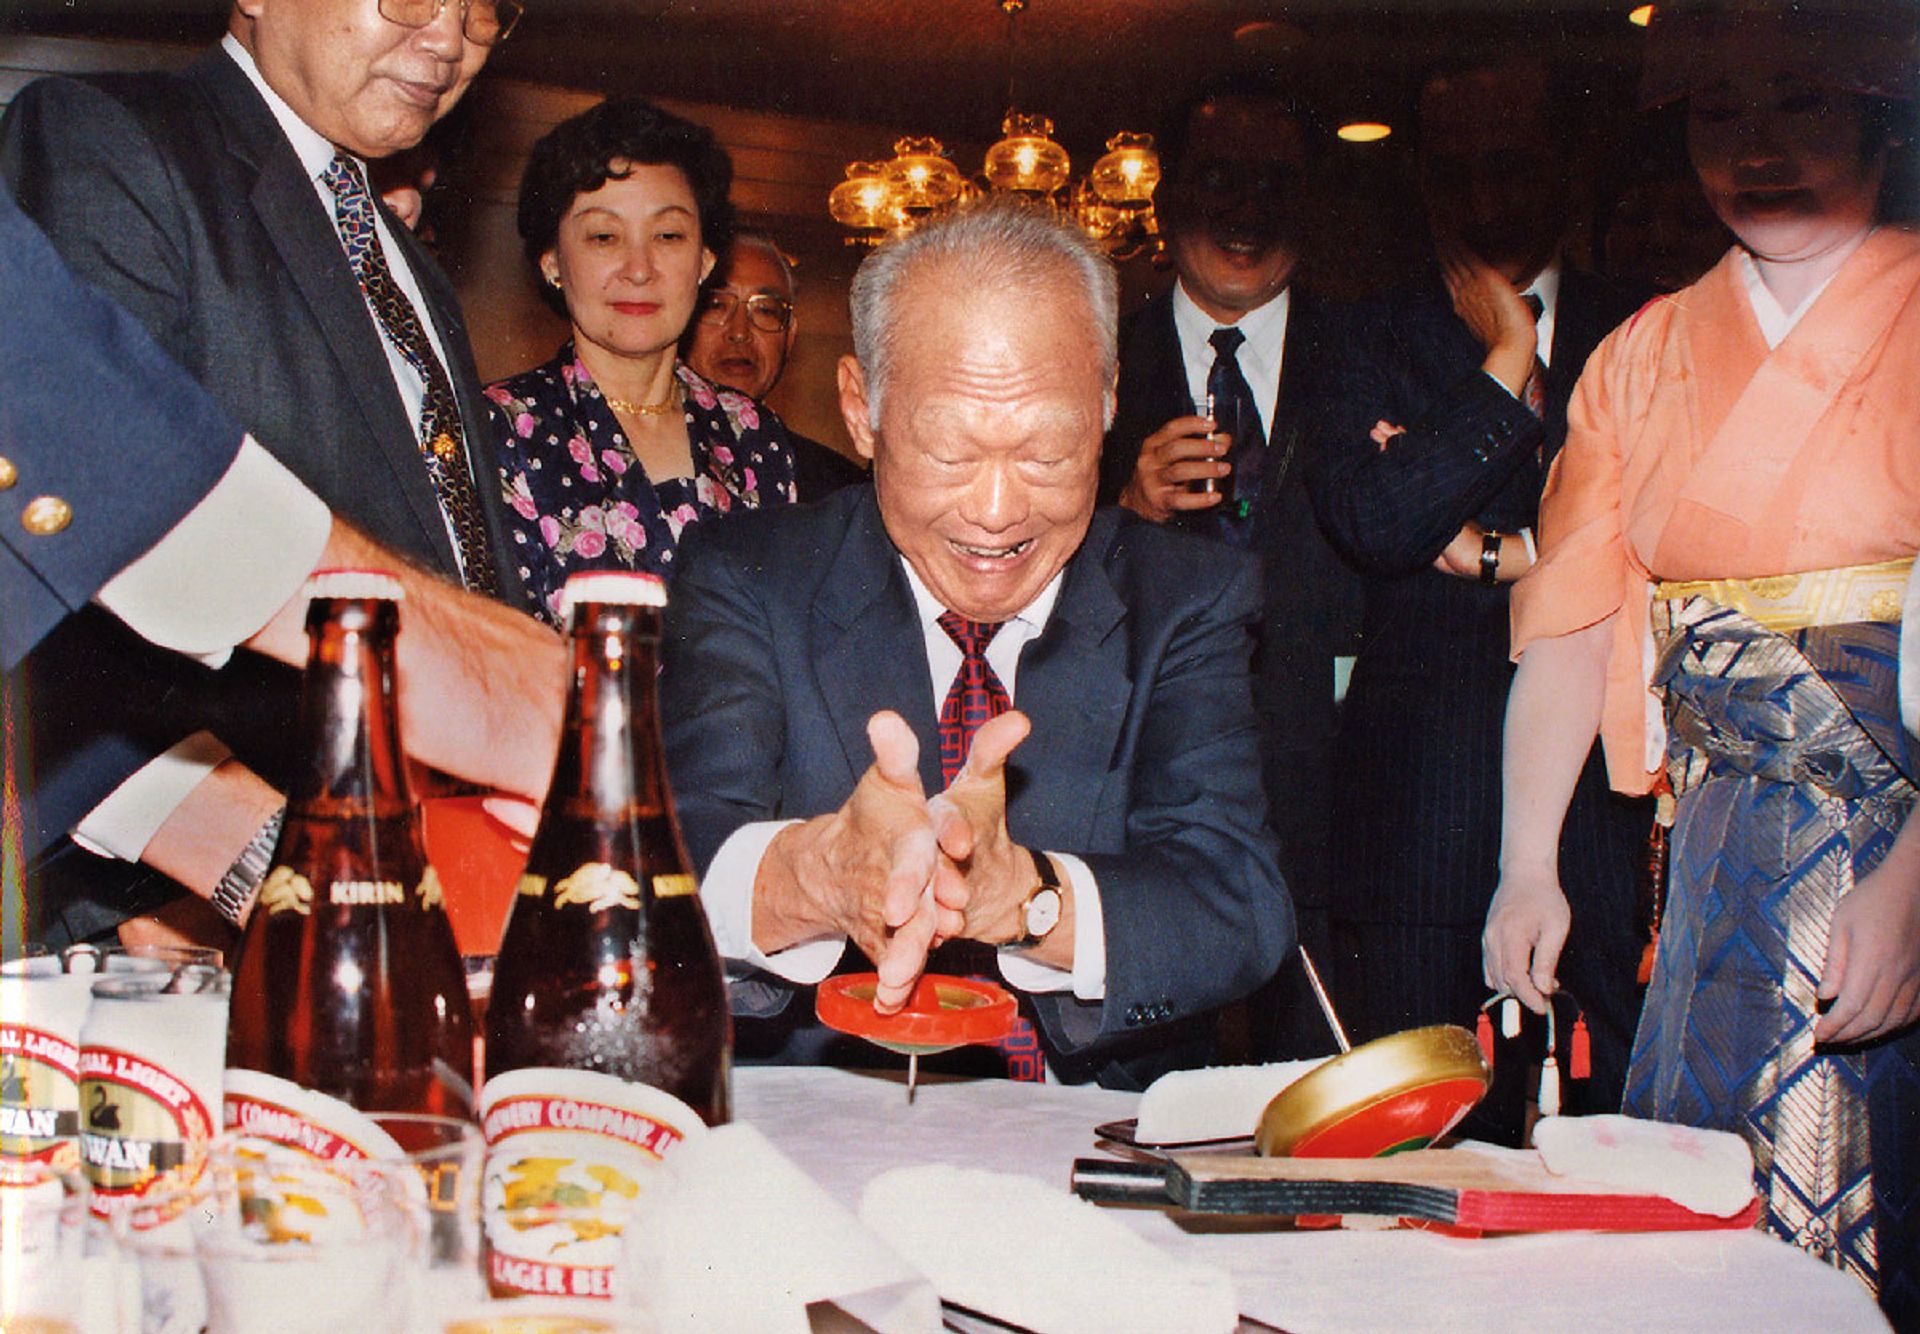 Mr Lee attempting to spin a top in Tokyo in 1993 during an official visit to Japan where he met Prime Minister Yasuhiro Nakasone and his wife Tsutako. The Japanese couple had hosted a dinner at their official residence for Mr and Mrs Lee in Tokyo in October 1986. Source: Lee Kuan Yew